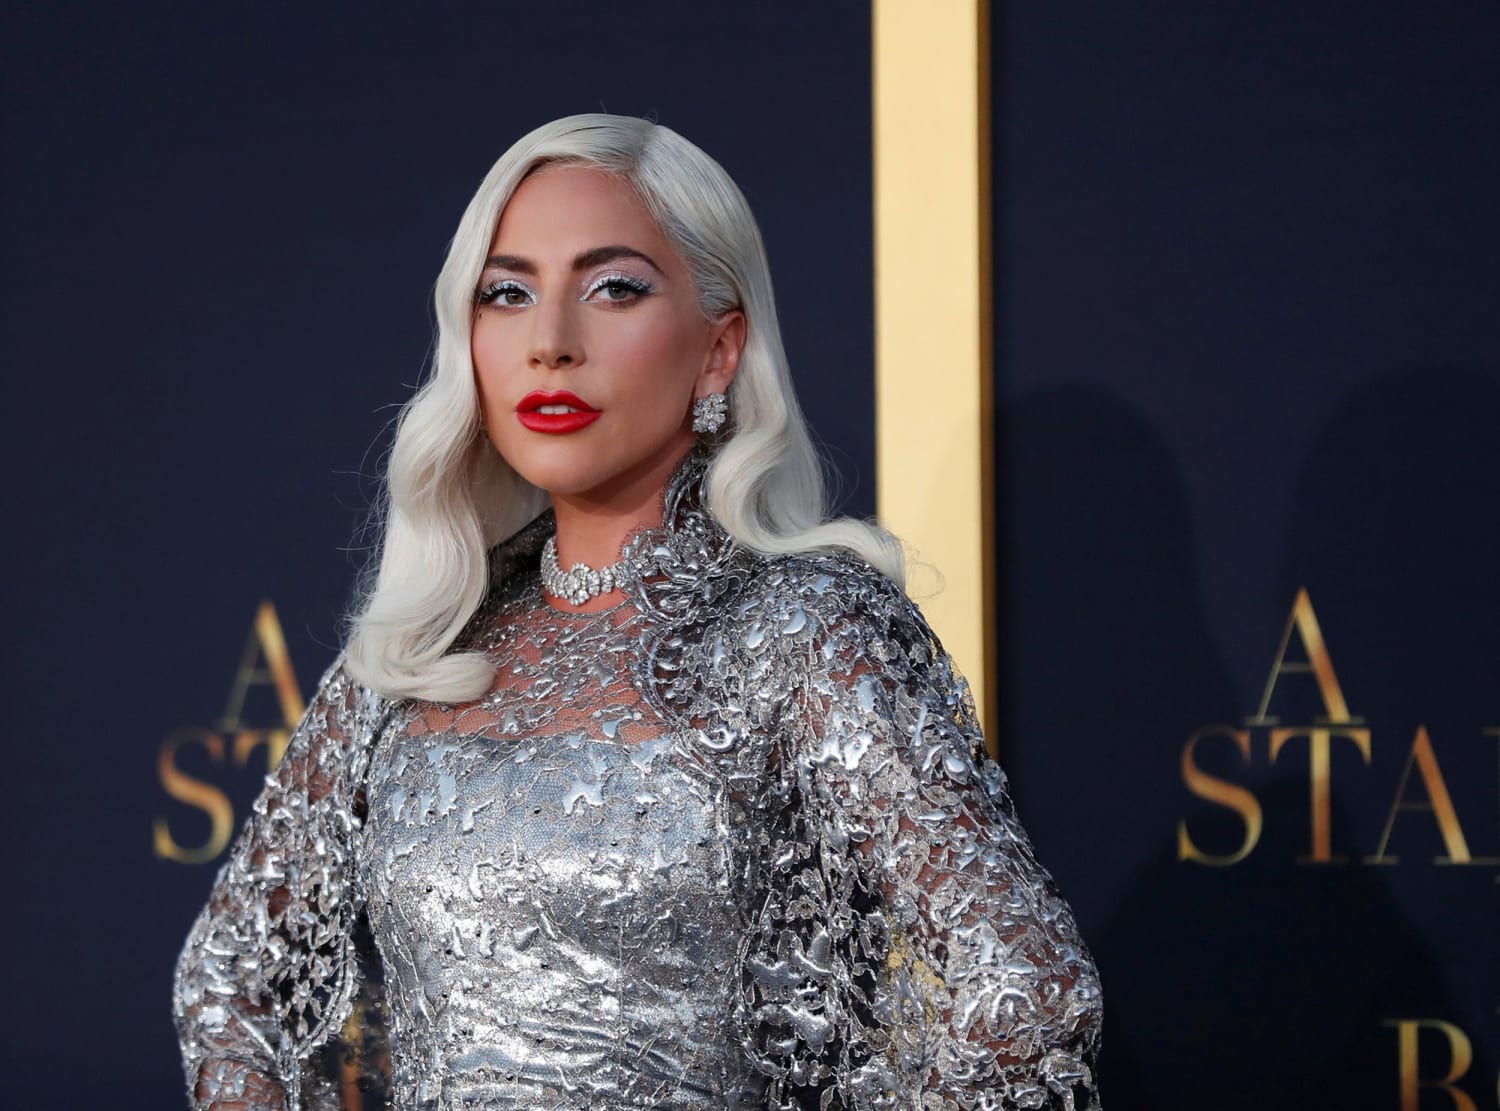 Lady Gaga Has A Surprisingly Simple Way You Can Help During This Difficult Time